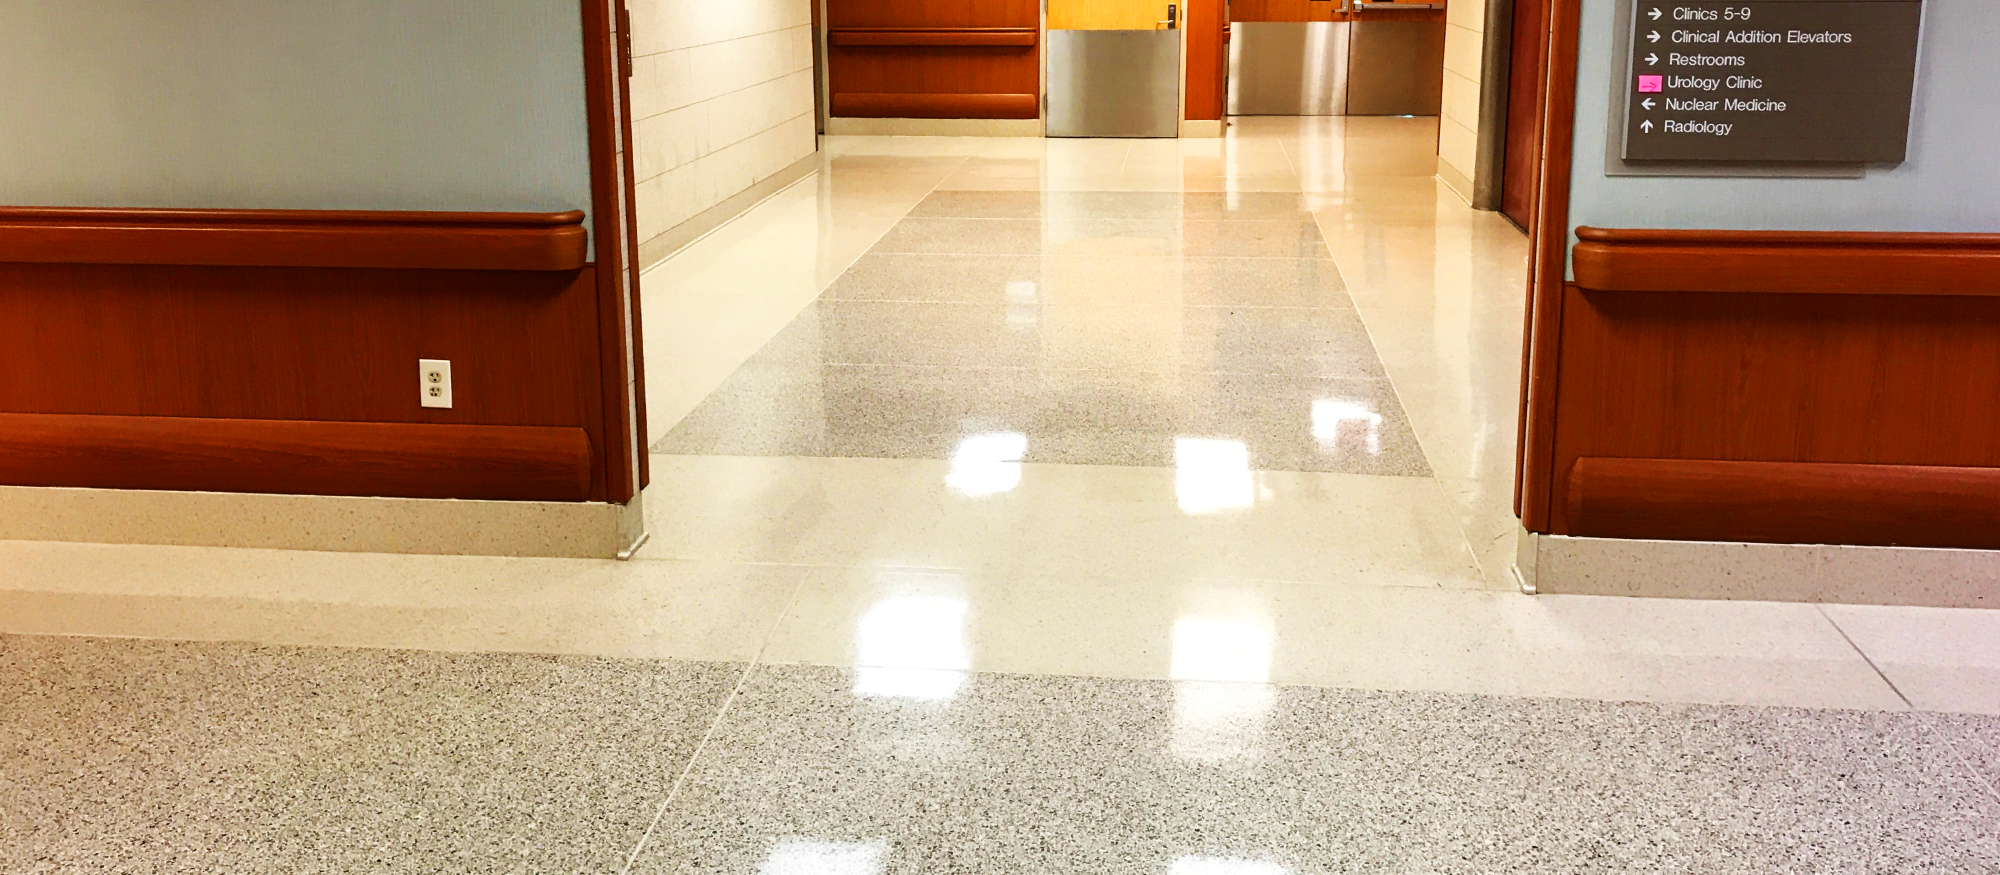 Terrazzo florin for hospital low maintenance commercial floors